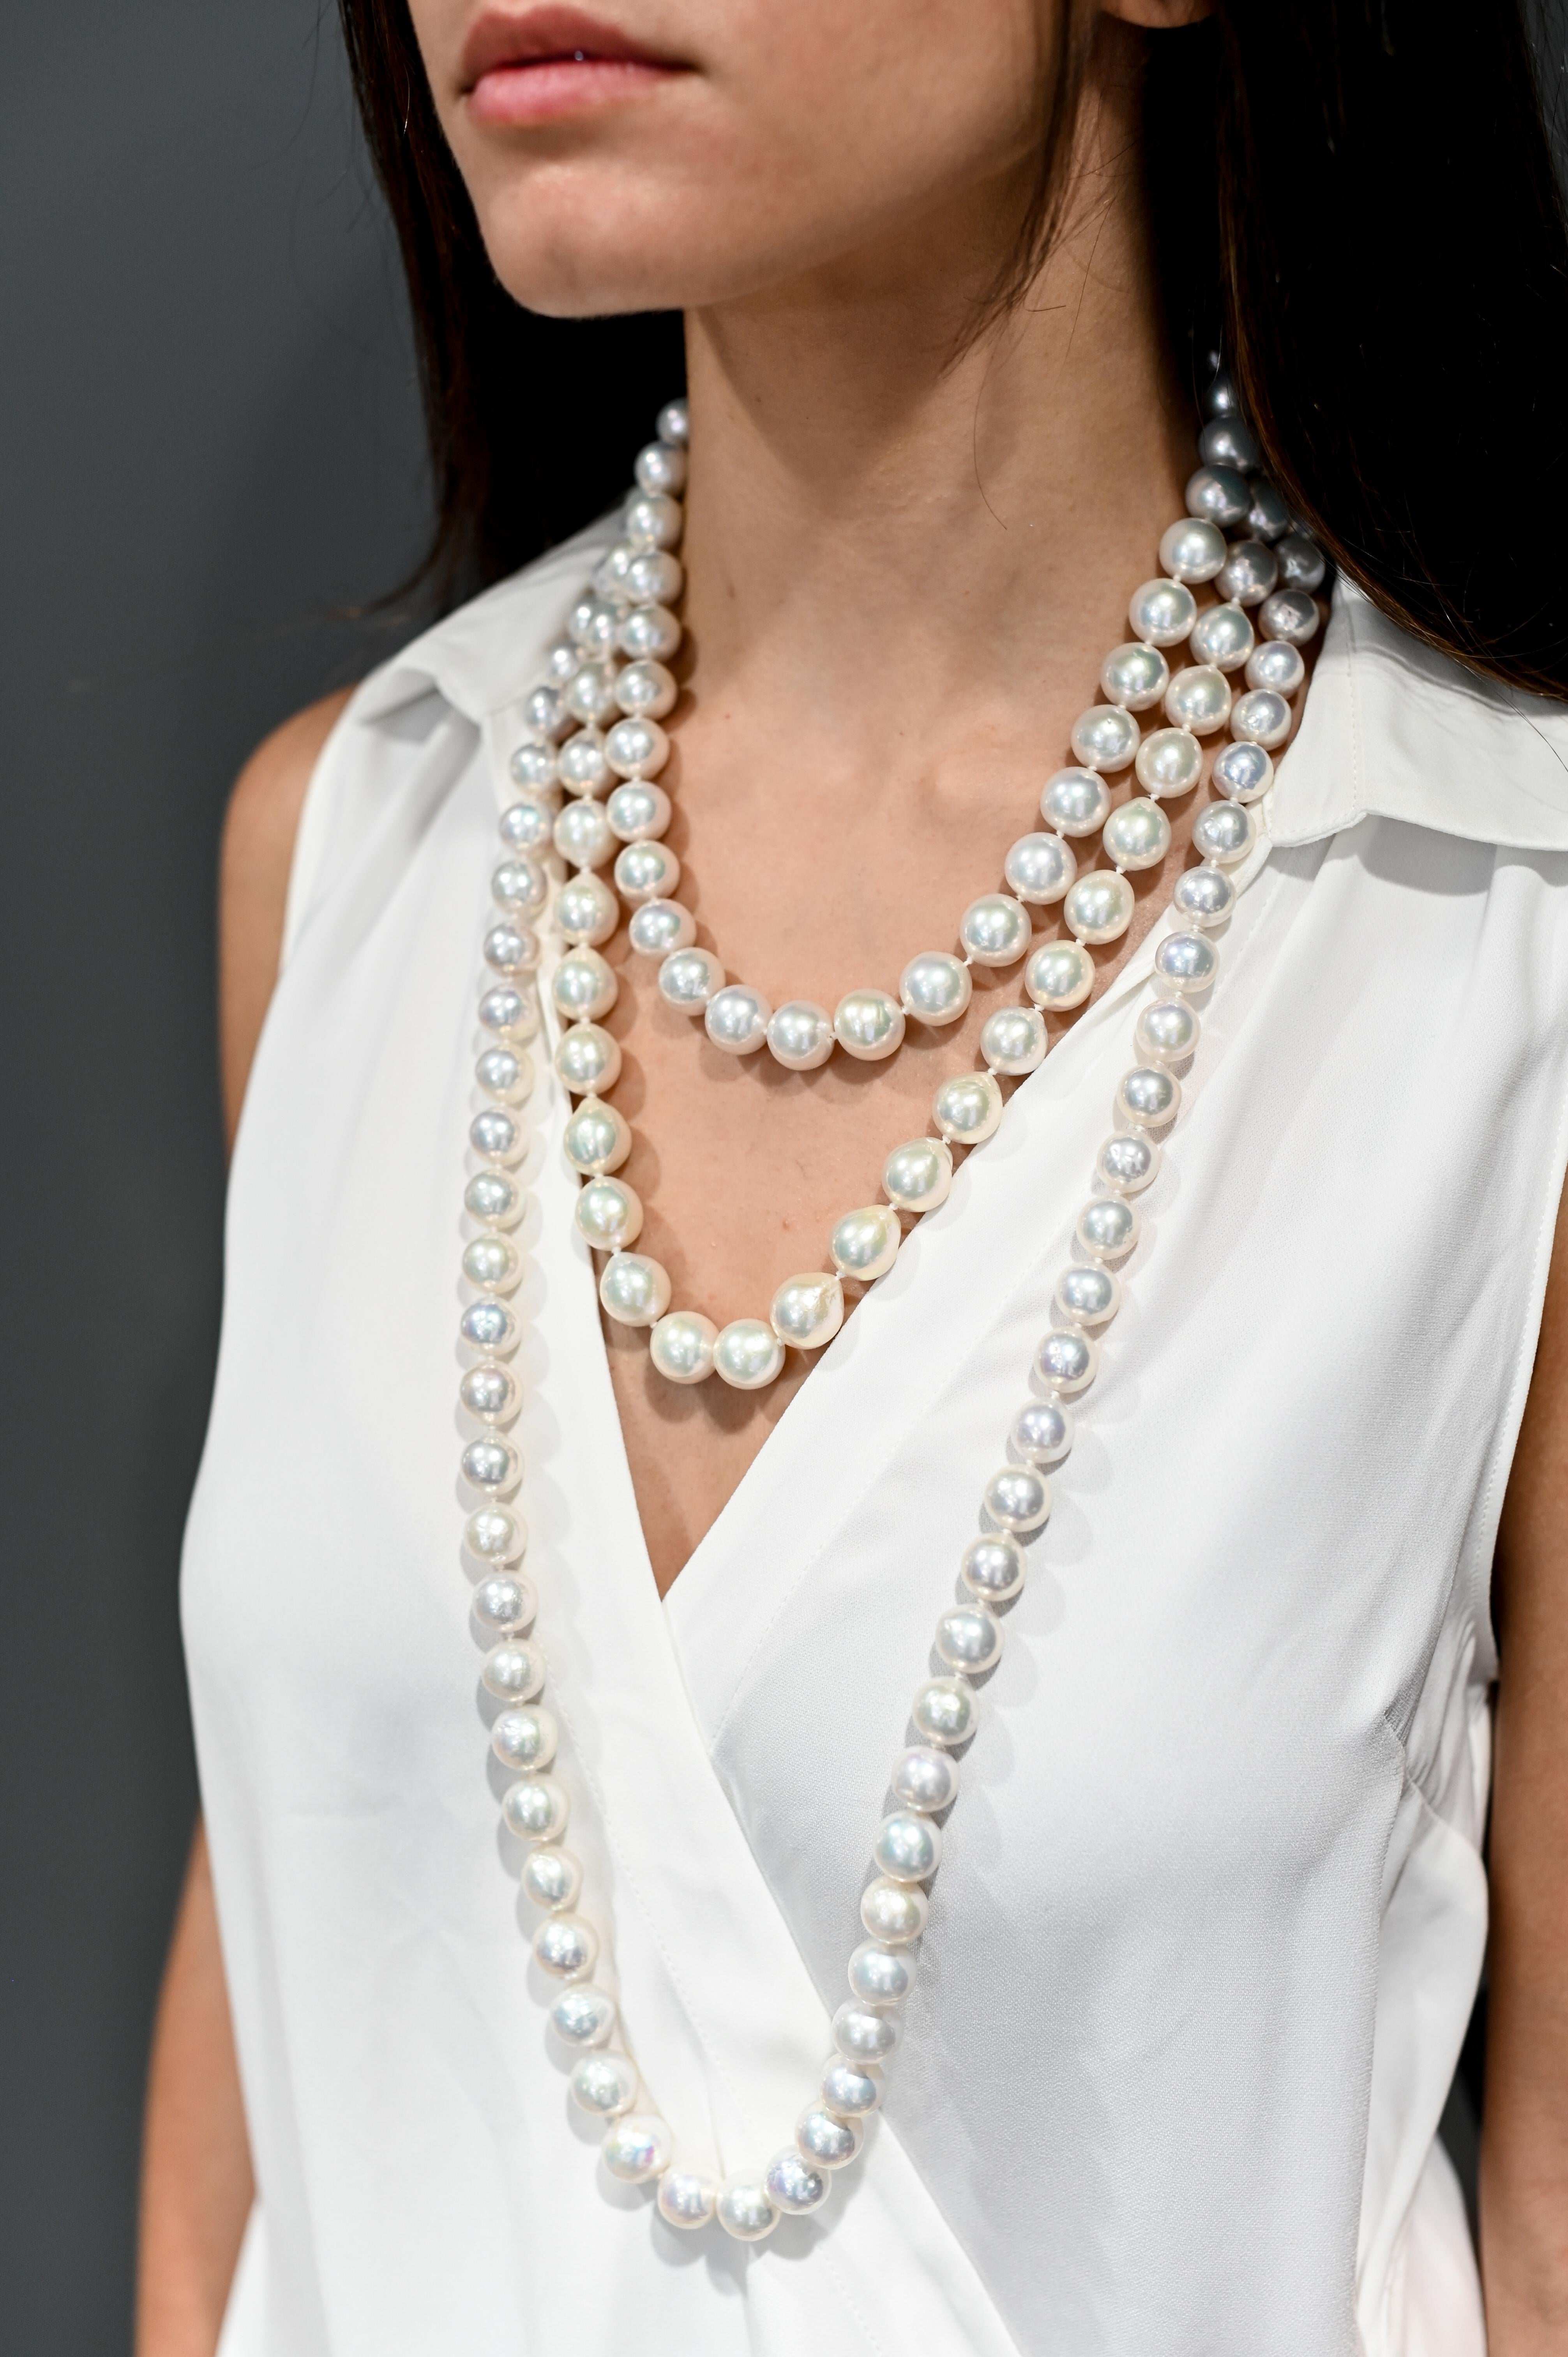 Beautifully matched in color, size, shape, and luster, this Faye Kim 18 Karat Gold White Freshwater Pearl Necklace makes a striking, elegant design statement. Ideal for every occasion, this timeless, classic piece, comprising 64 pearls, will